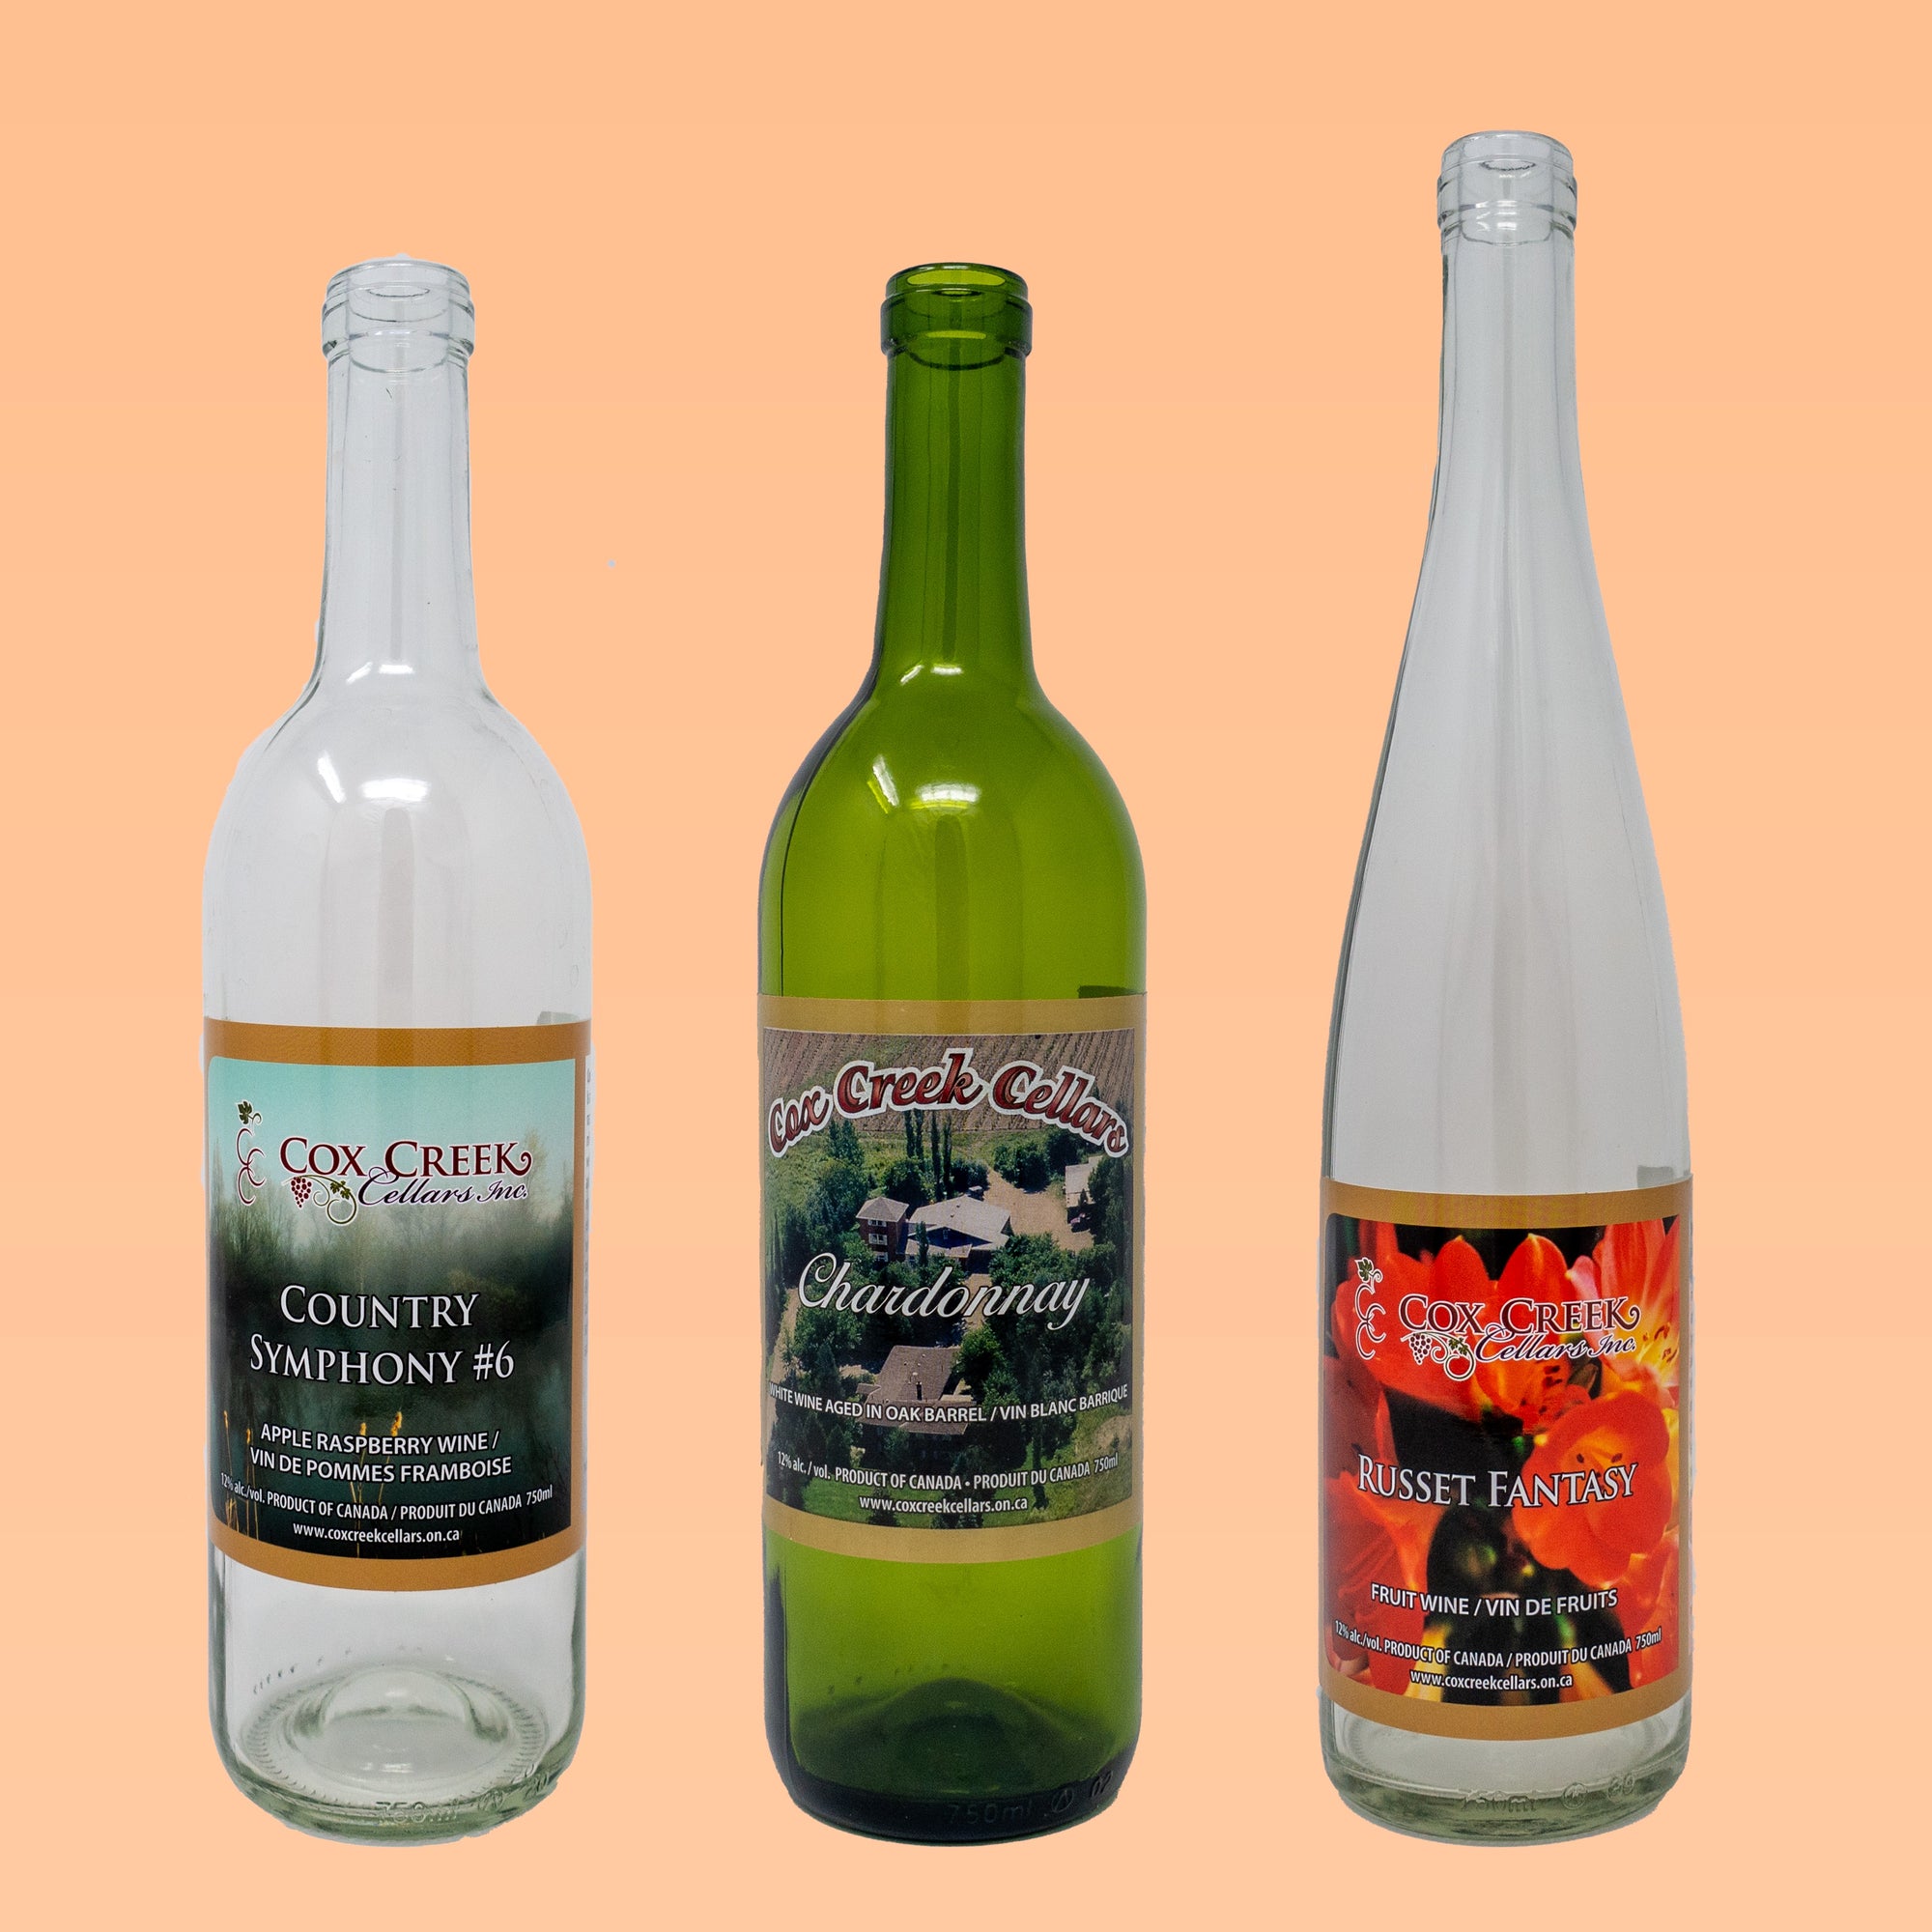 Used Wine Bottles - 750ml | Sold by the Case